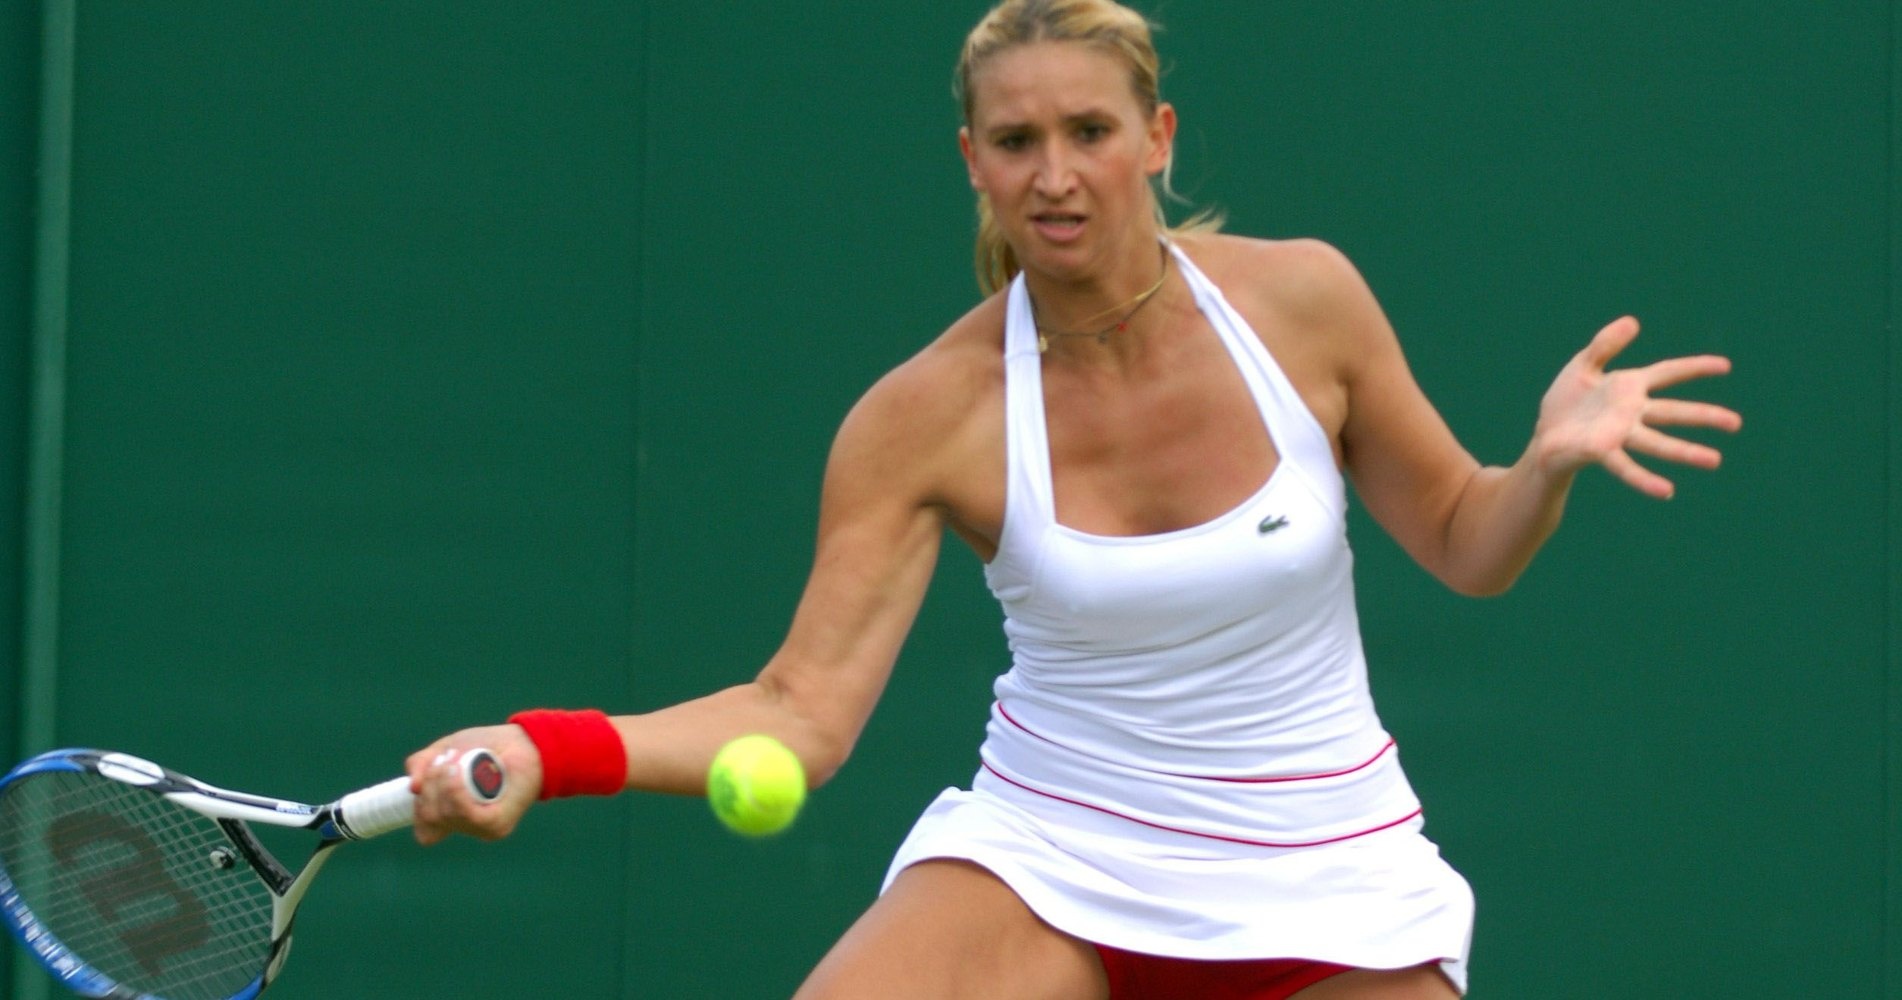 Is it acceptable if my panties are visible while I play tennis? - Quora